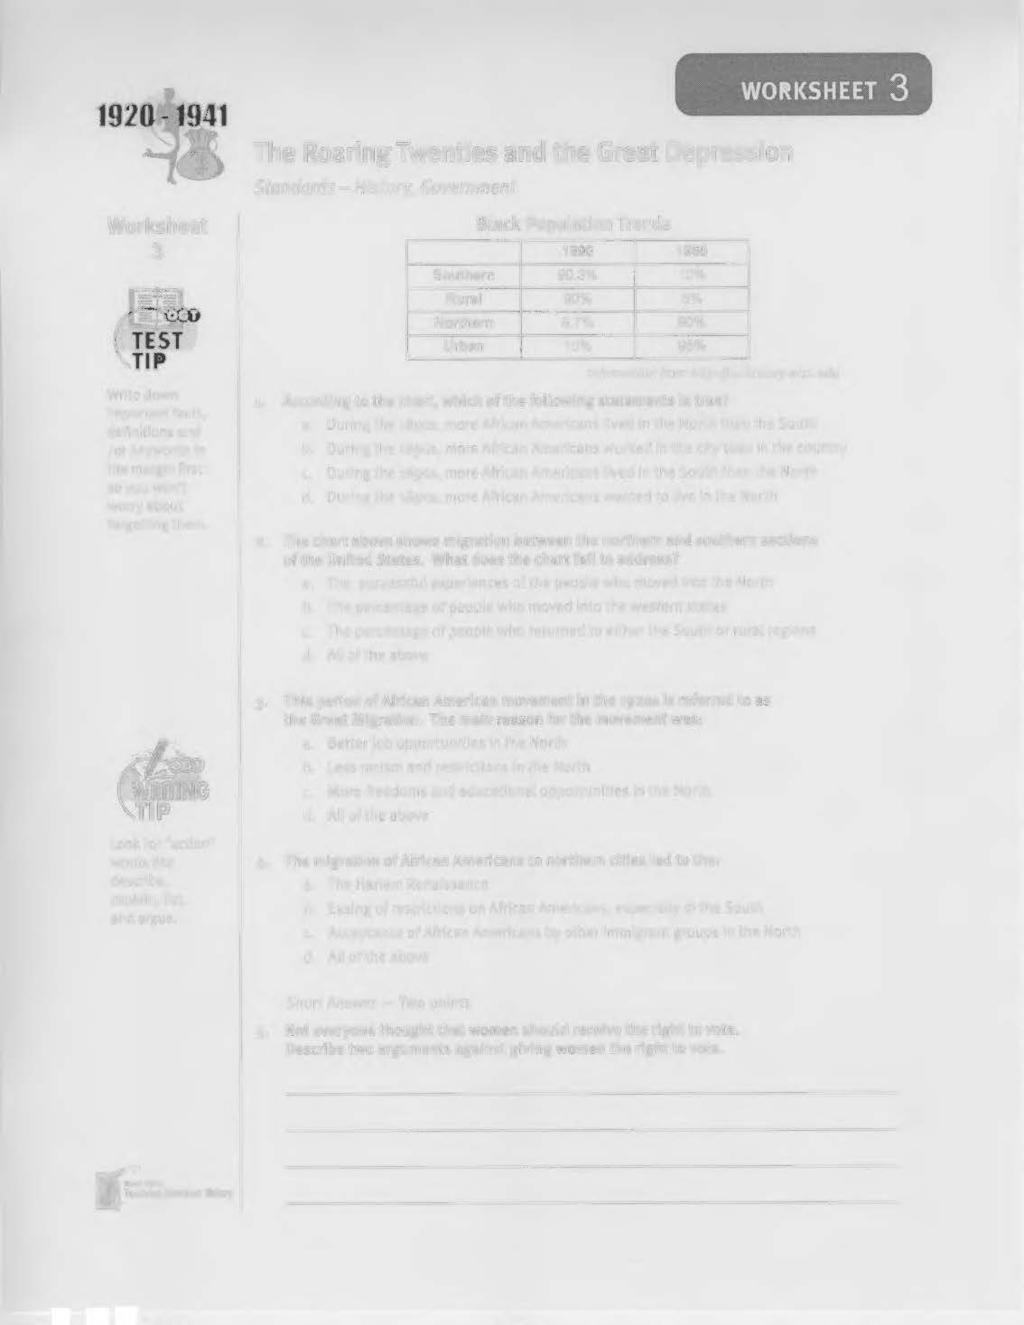 1 Worksheet Standards- History, Government Black Population Trends 3 1890 1960 Southern 90.3% 10% Rural 90% 5% Northern 9.7% 90% Urban 10% 95% Information from http://us.history. wisc.